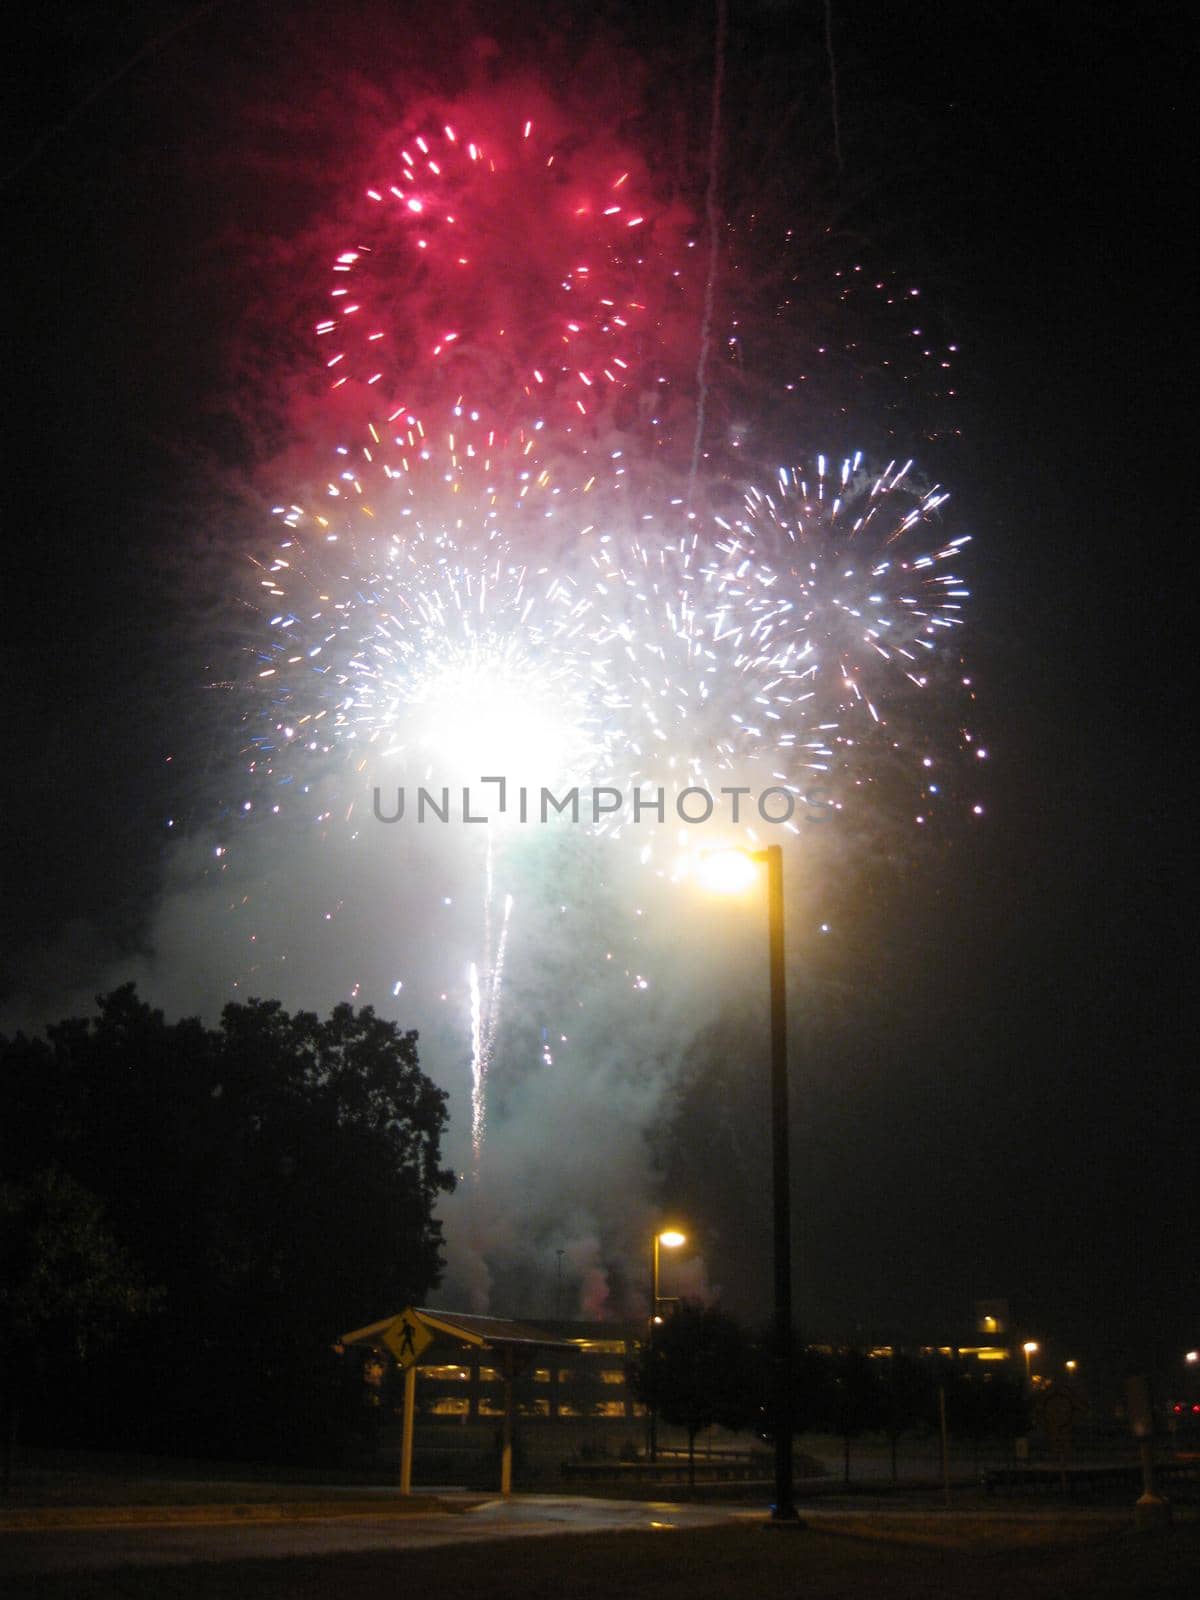 White and red fireworks silhouette trees and a phone pole late at night by njproductions